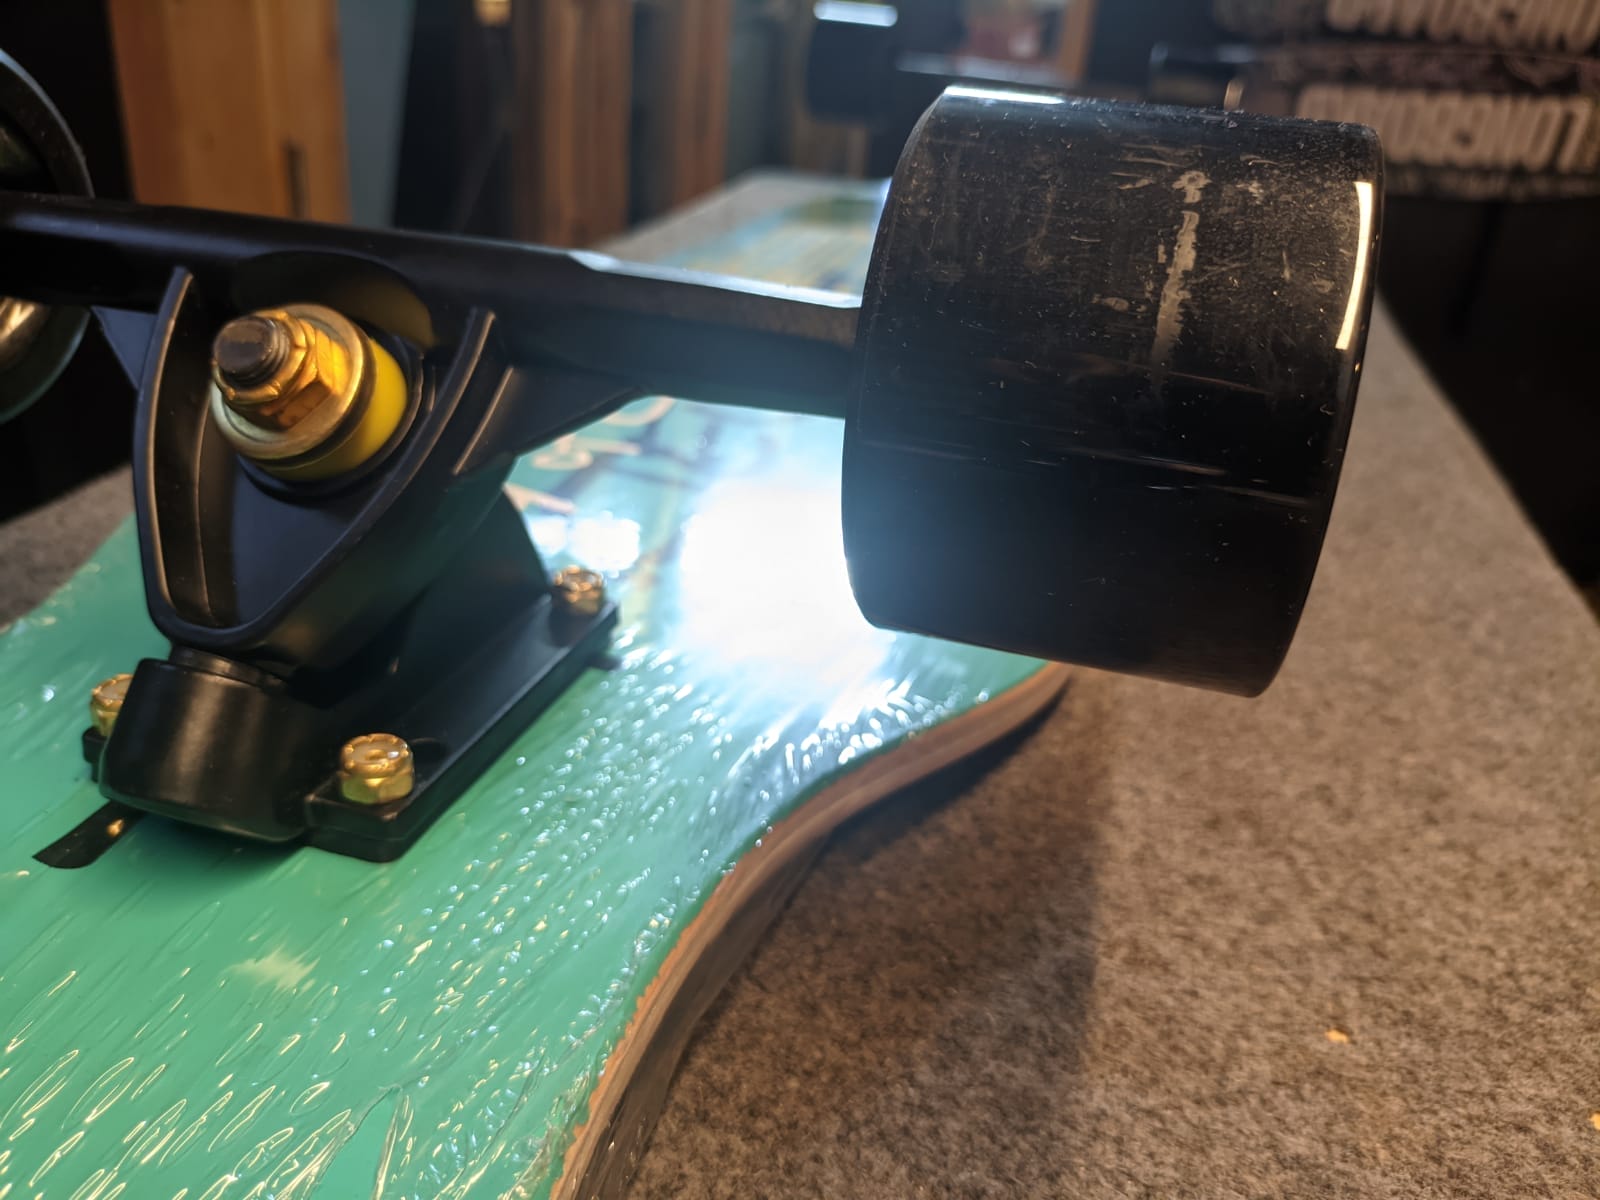 Wheel bite is a key worry for longboard riders, but this board has addressed this issue with its exact cuts and concave shape.